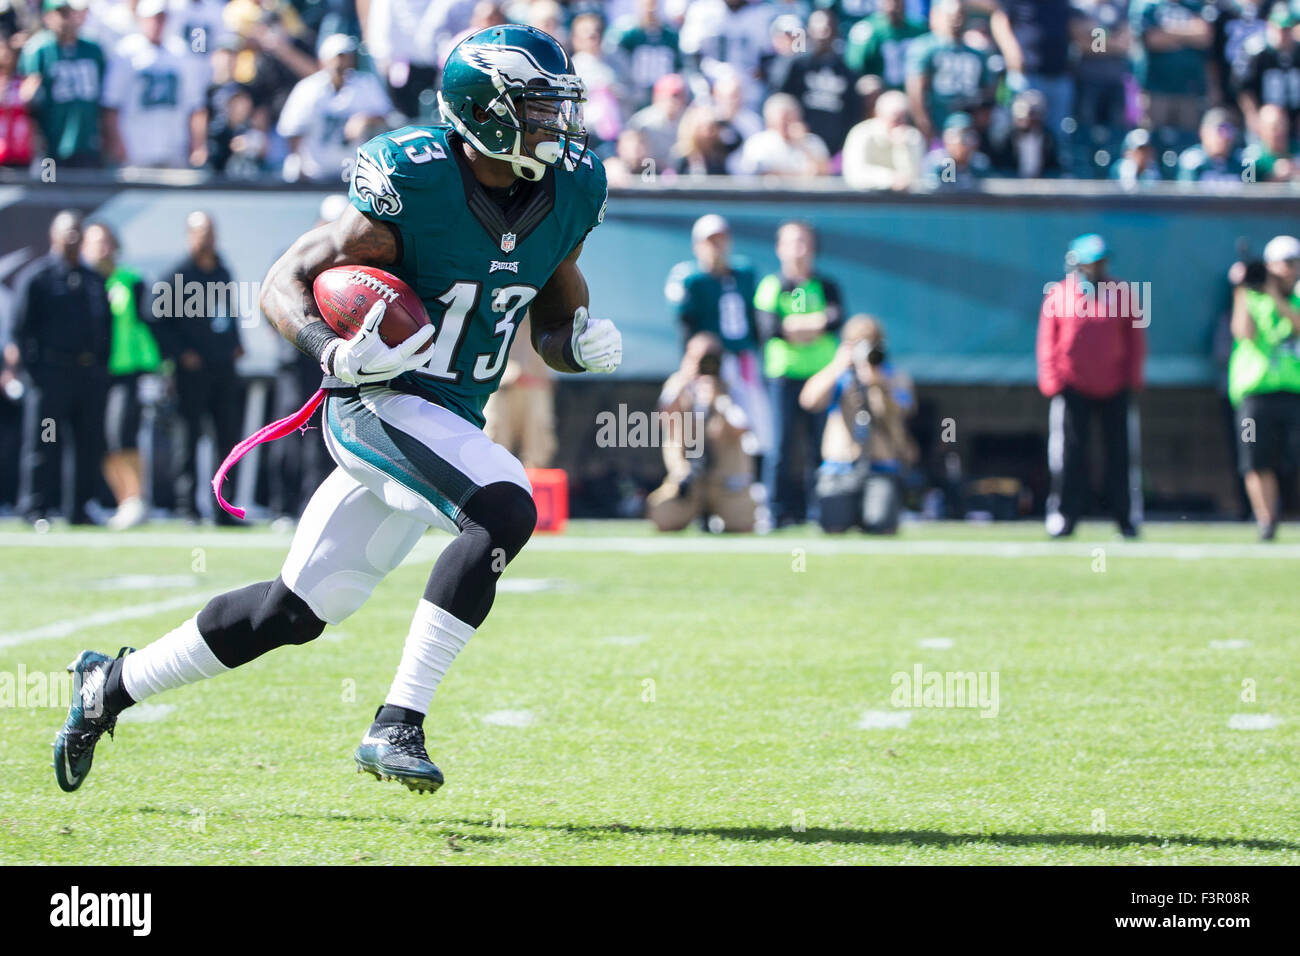 Philadelphia, Pennsylvania, USA. 11th Oct, 2015. October 11, 2015: Philadelphia Eagles wide receiver Josh Huff (13) returns the opening kick off during the NFL game between the New Orleans Saints and the Philadelphia Eagles at Lincoln Financial Field in Philadelphia, Pennsylvania. The Philadelphia Eagles won 39-17. Christopher Szagola/CSM Credit:  Cal Sport Media/Alamy Live News Stock Photo